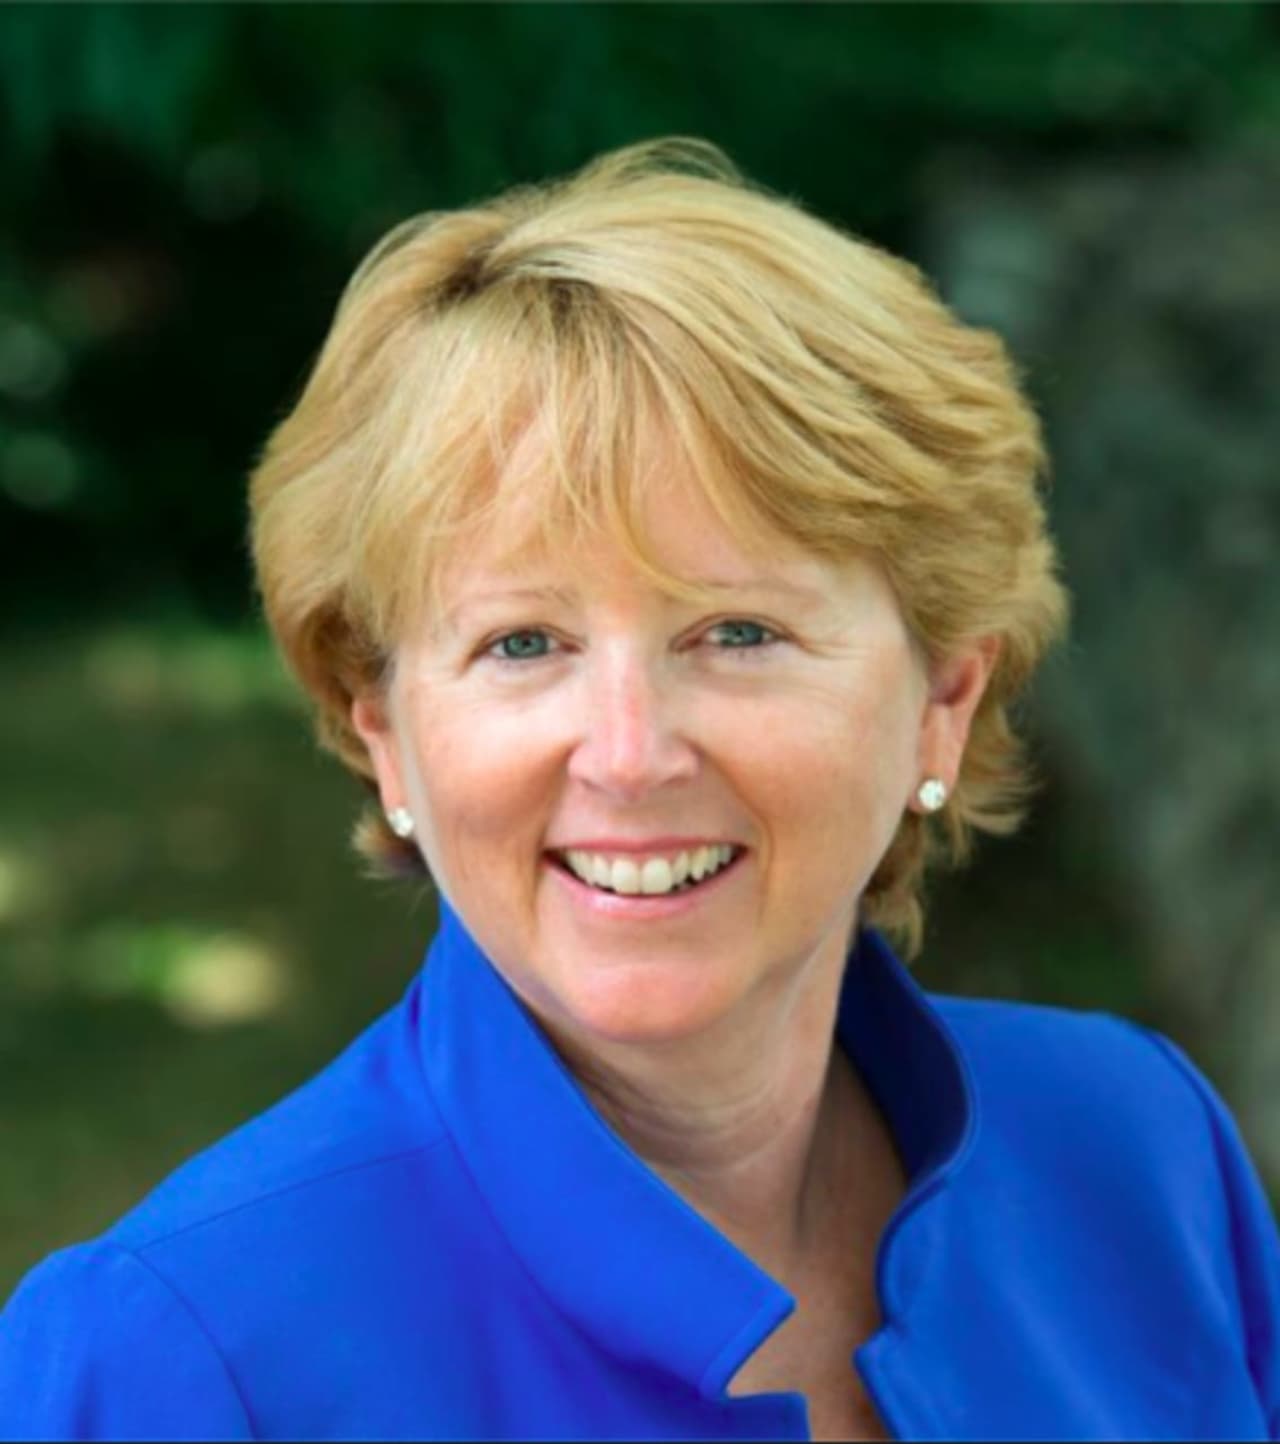 Lynne Vanderslice was elected first selectman of Wilton in Tuesday's election.